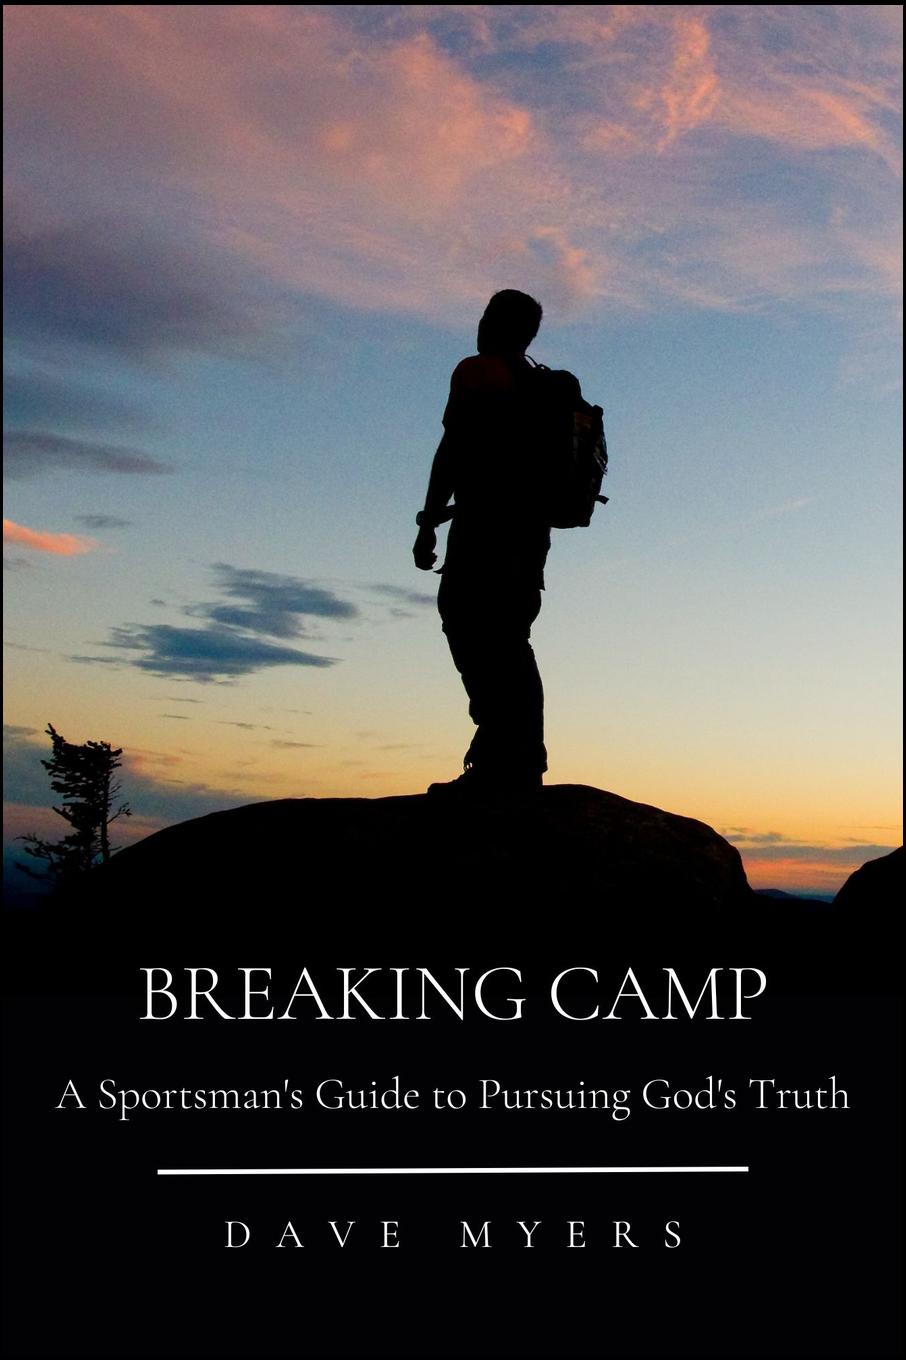 BreakingCamp's embedded Photo